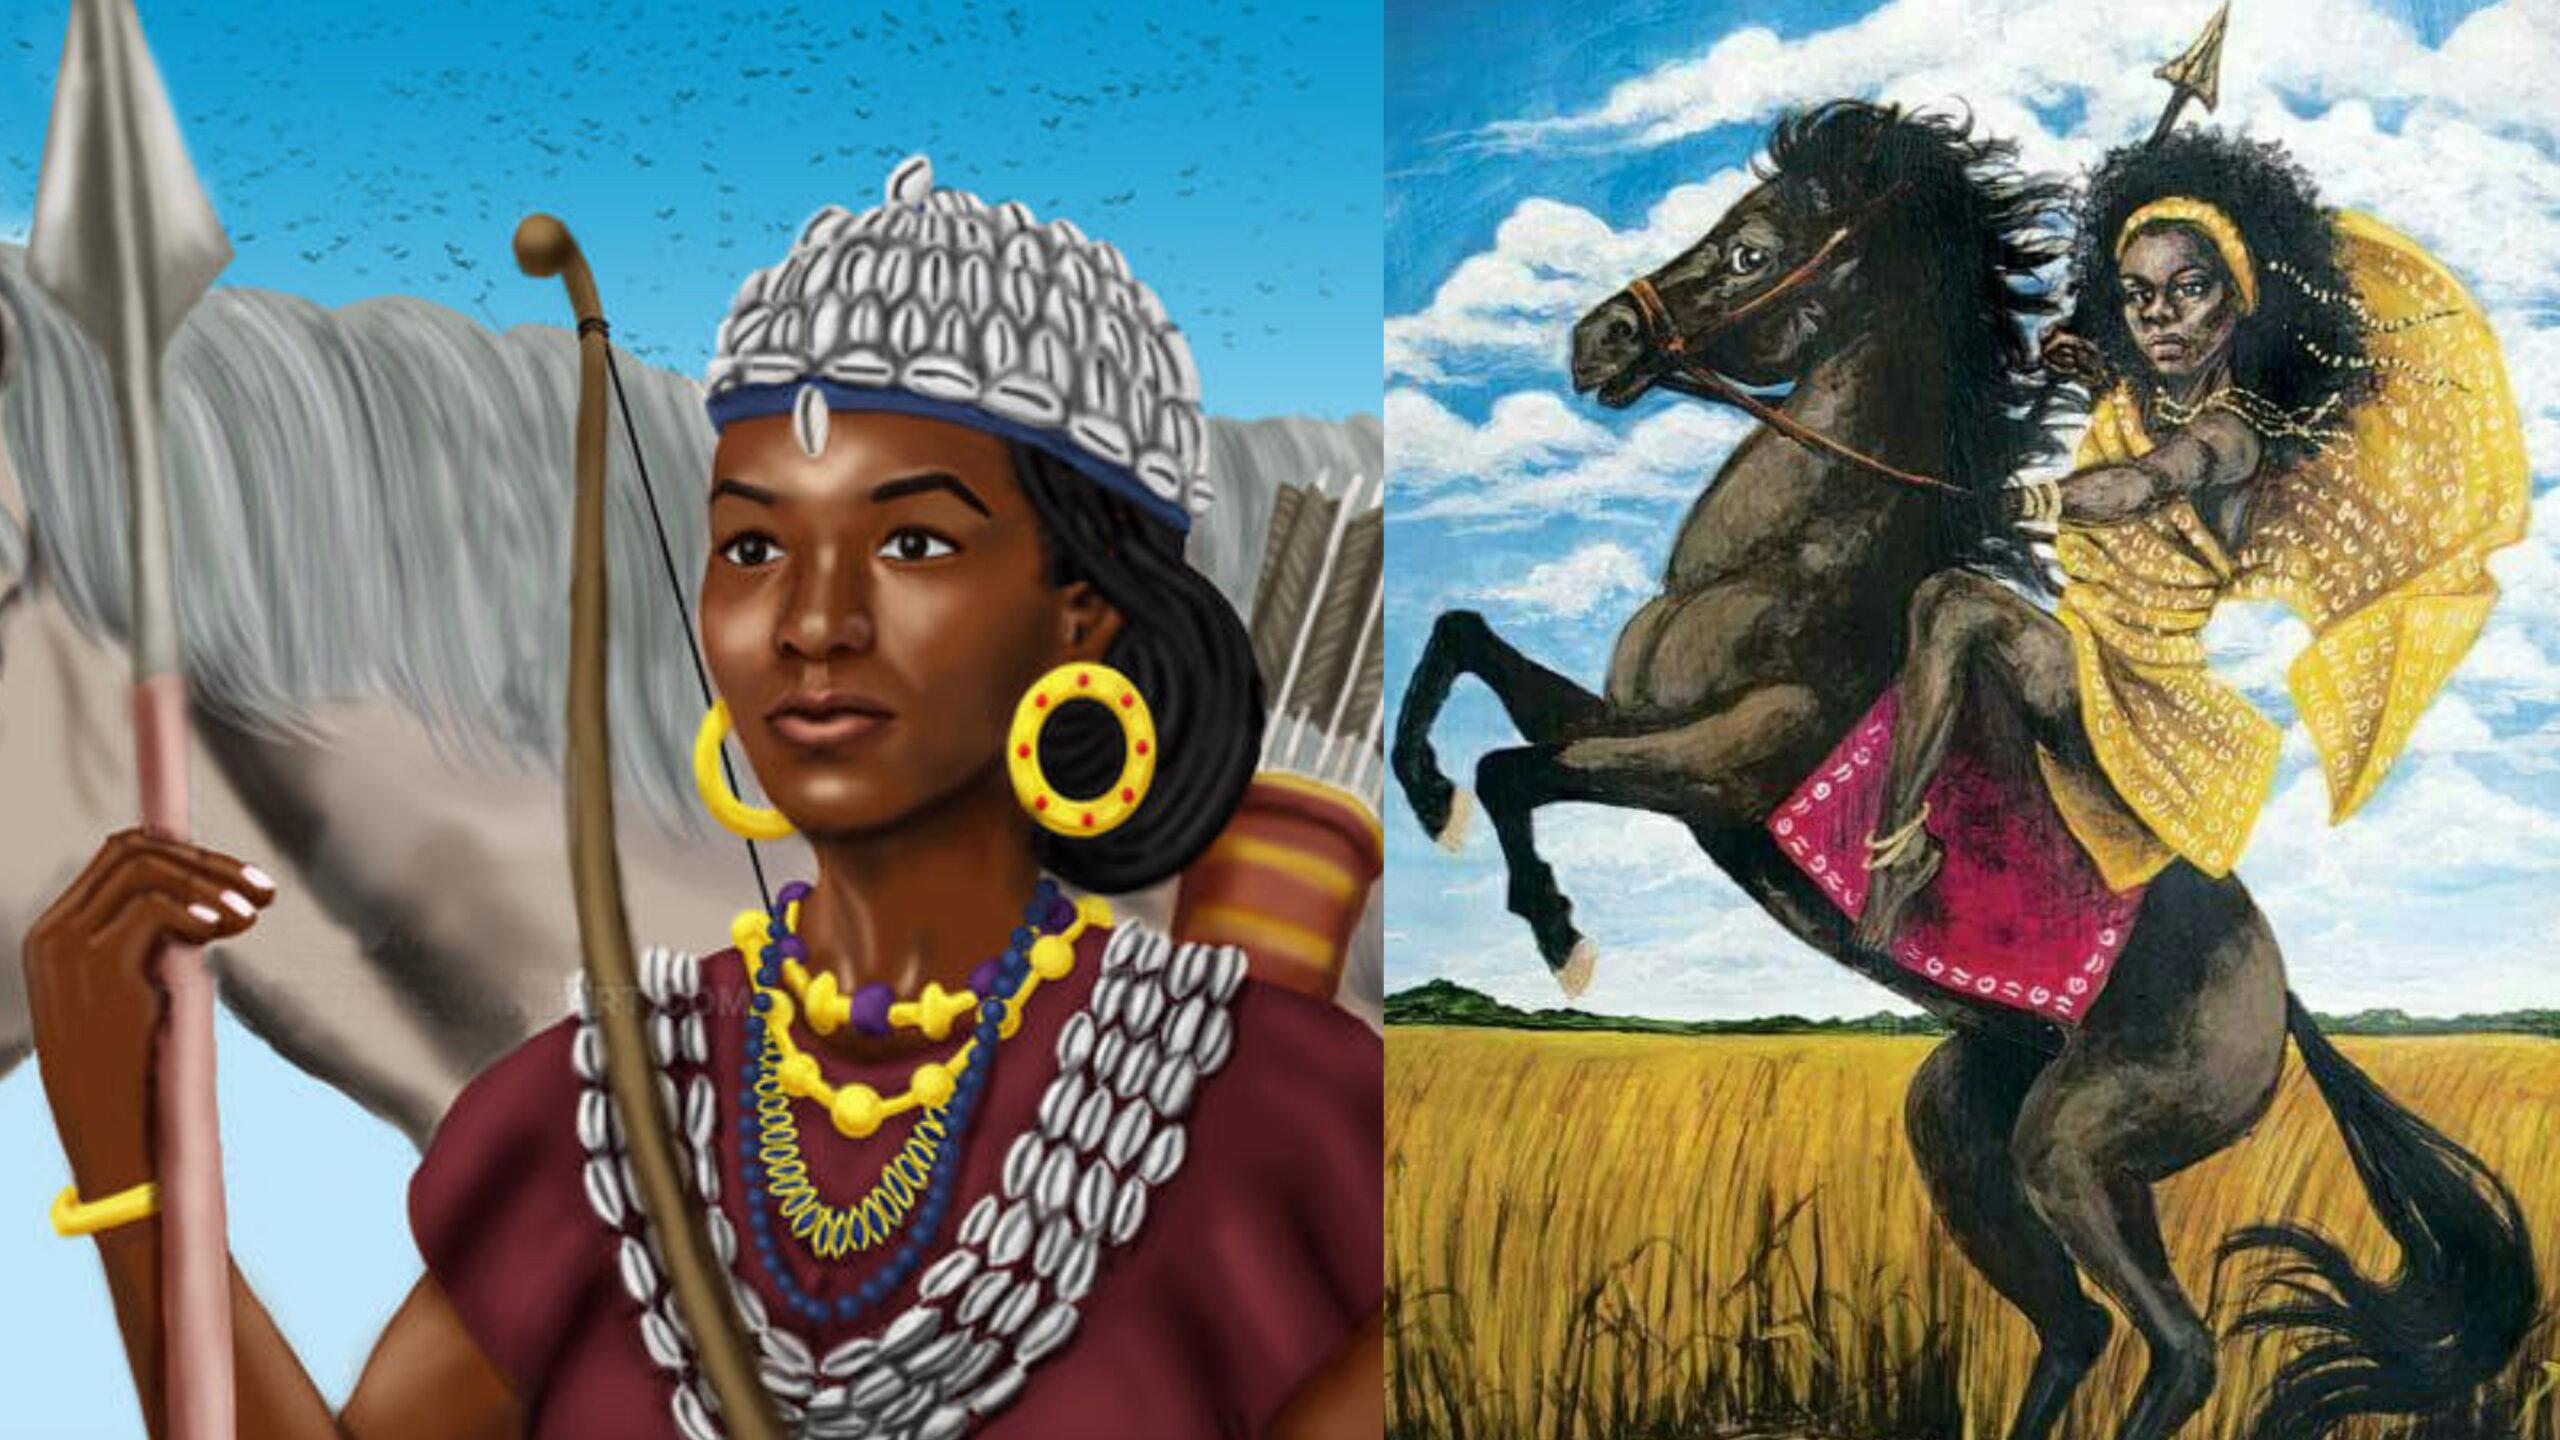 Yennnenga, Dagomba Warrior Princess whose son founded Mossi Kingdom in West Africa